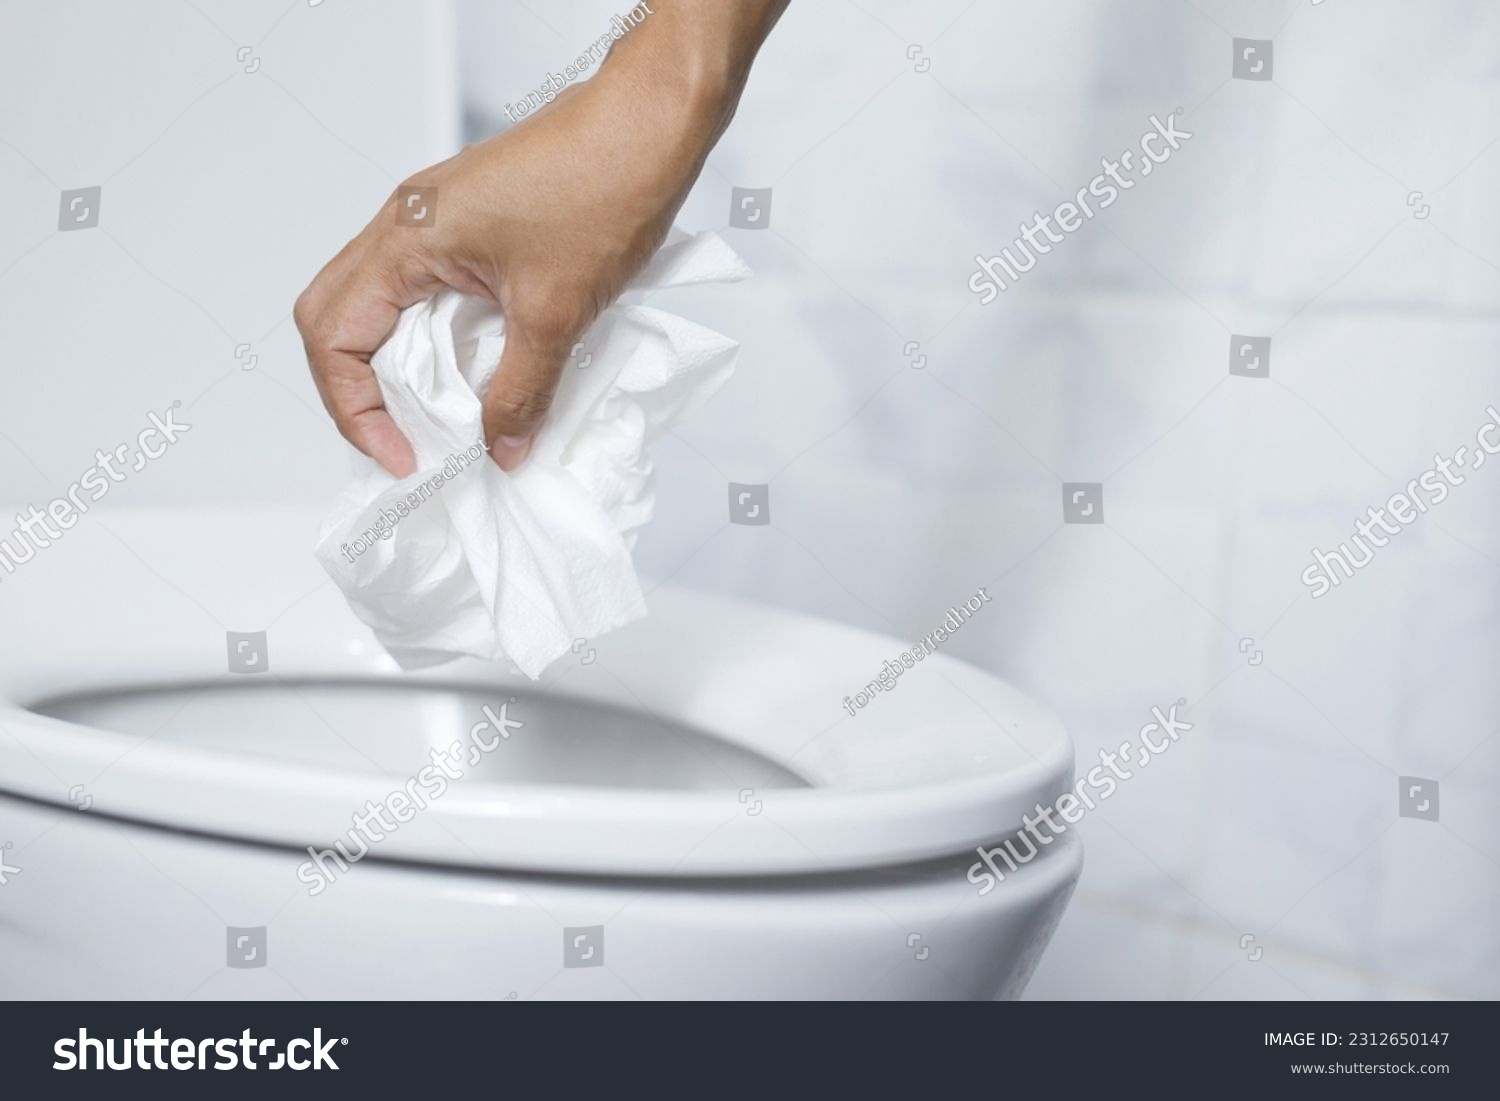 close up hand holding a tissue to be thrown into the toilet bowl. Can not drain water of toilet paper in the toilet bowl cause the stool to clog up. #2312650147